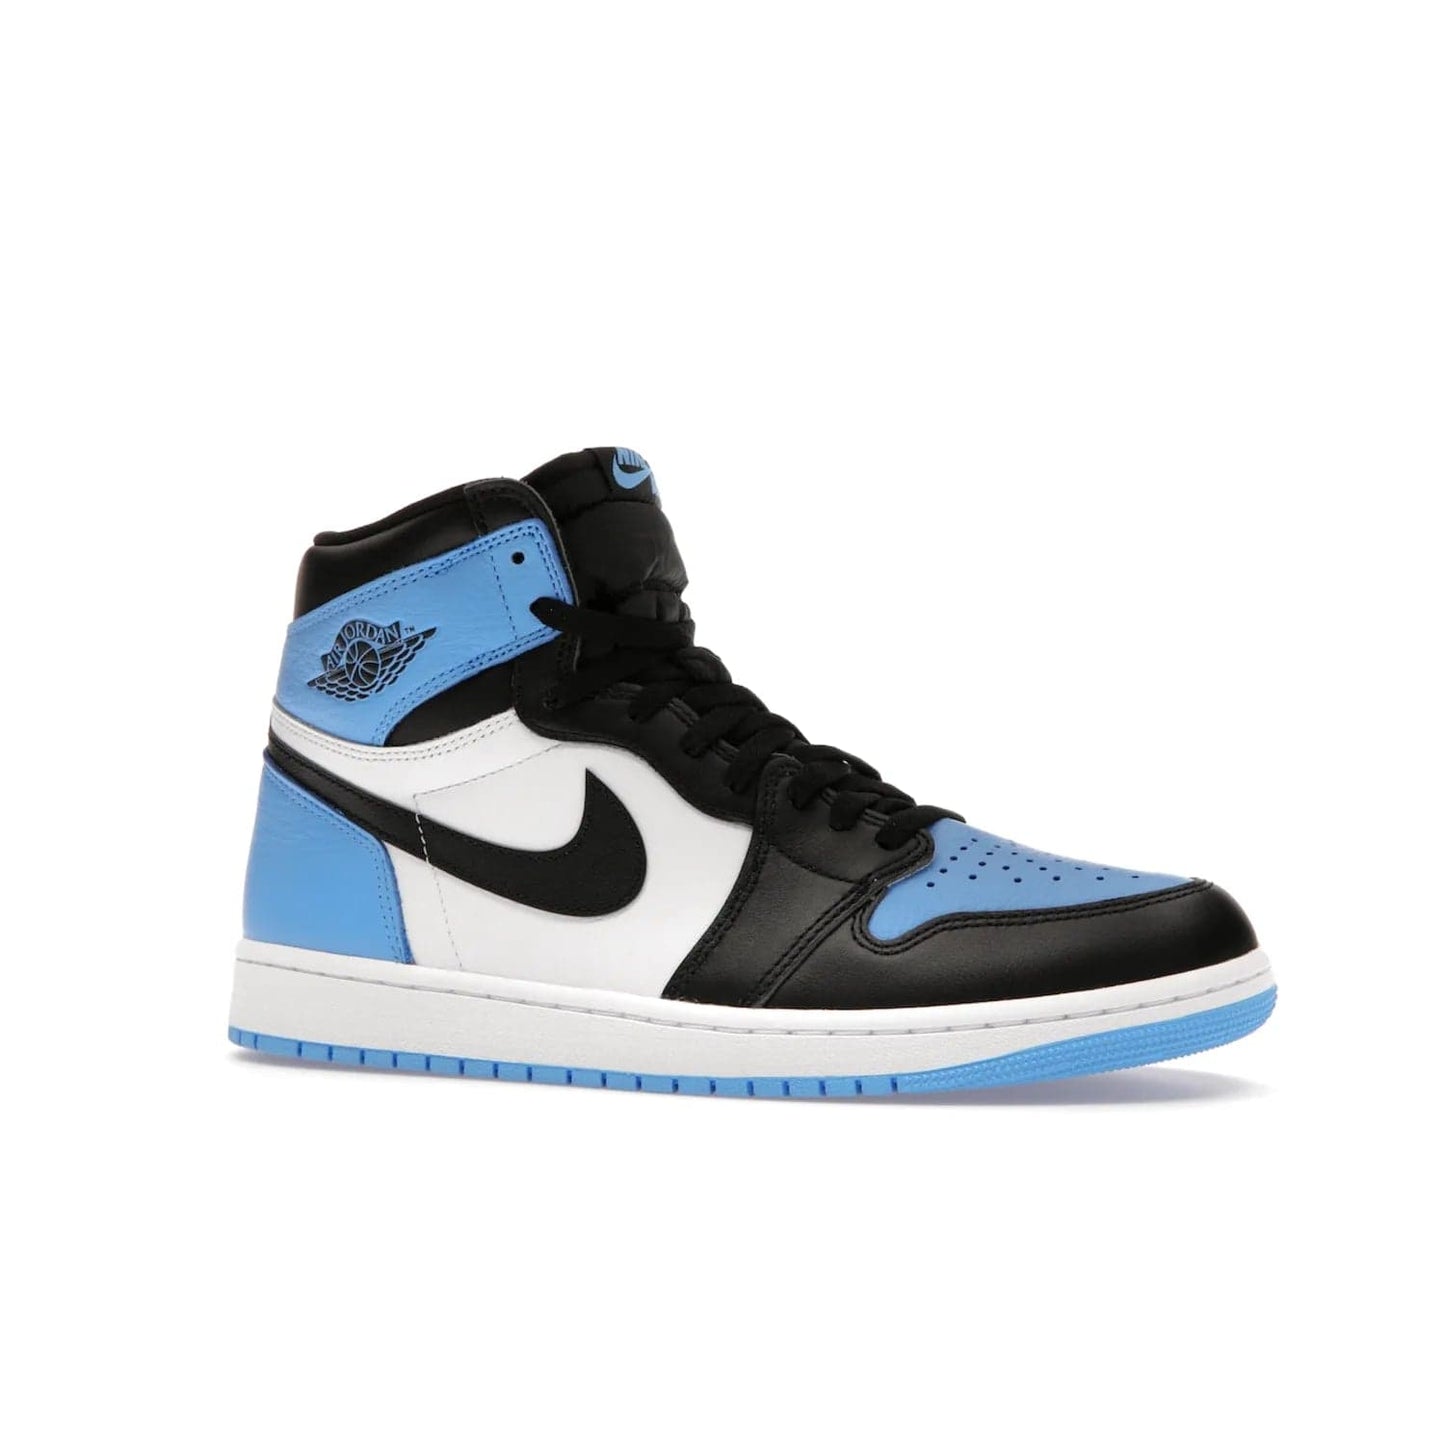 Jordan 1 Retro High OG UNC Toe - Image 3 - Only at www.BallersClubKickz.com - Jordan 1 High OG UNC Toe is a fashionable, high-quality sneaker featuring University Blue, Black White and White. Releasing July 22, 2023, it's the perfect pick up for sneakerheads.